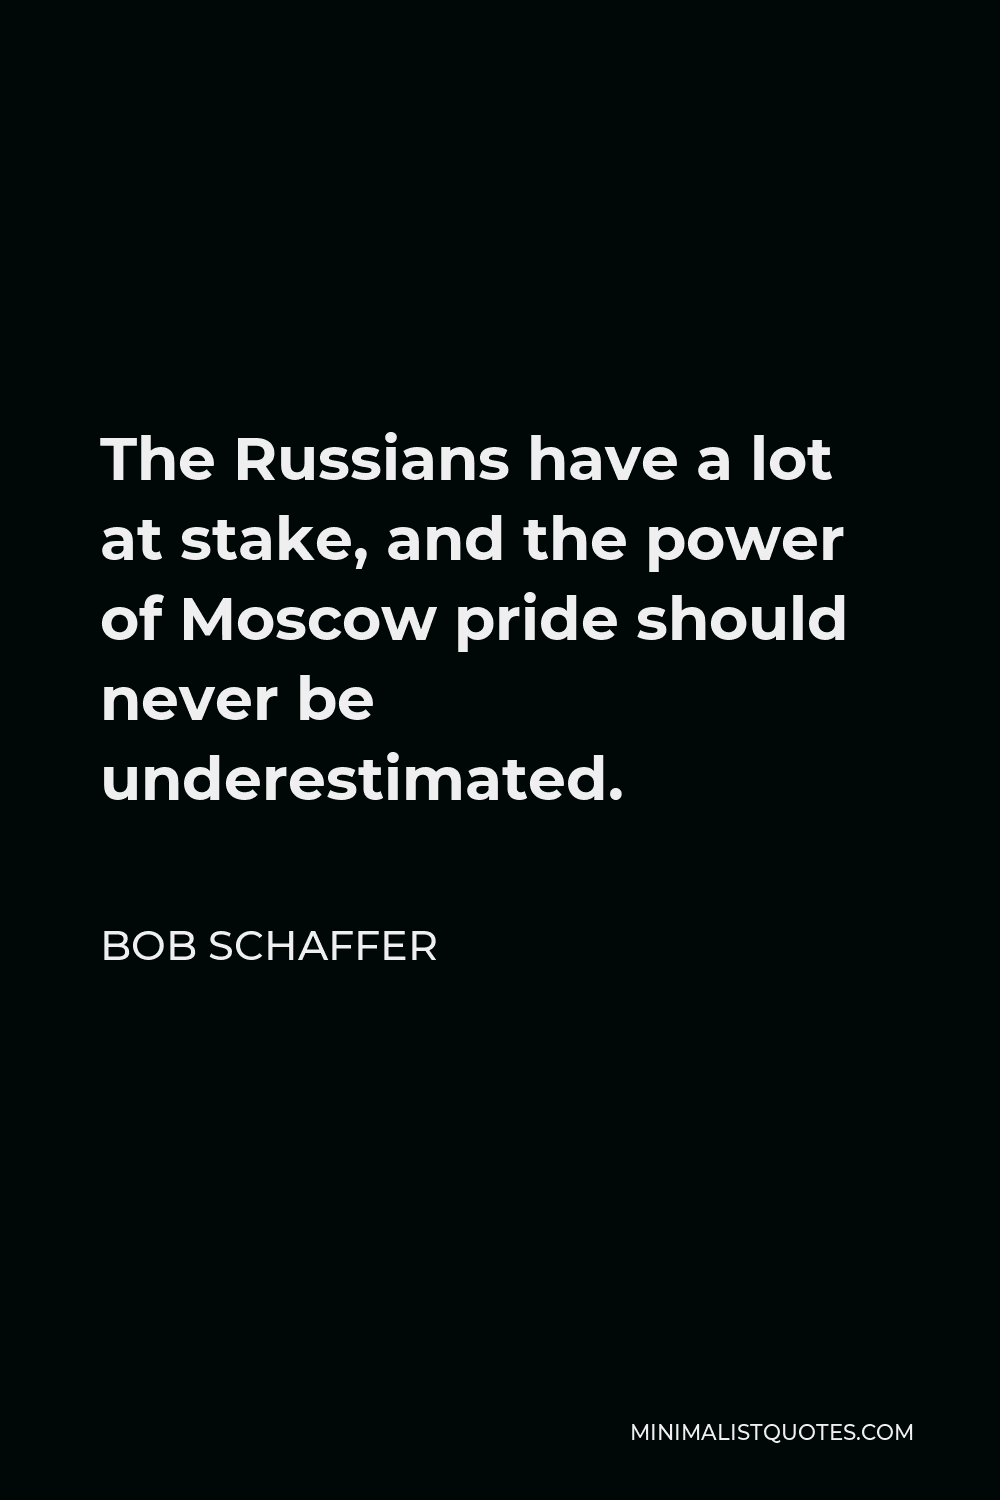 Bob Schaffer Quote - The Russians have a lot at stake, and the power of Moscow pride should never be underestimated.